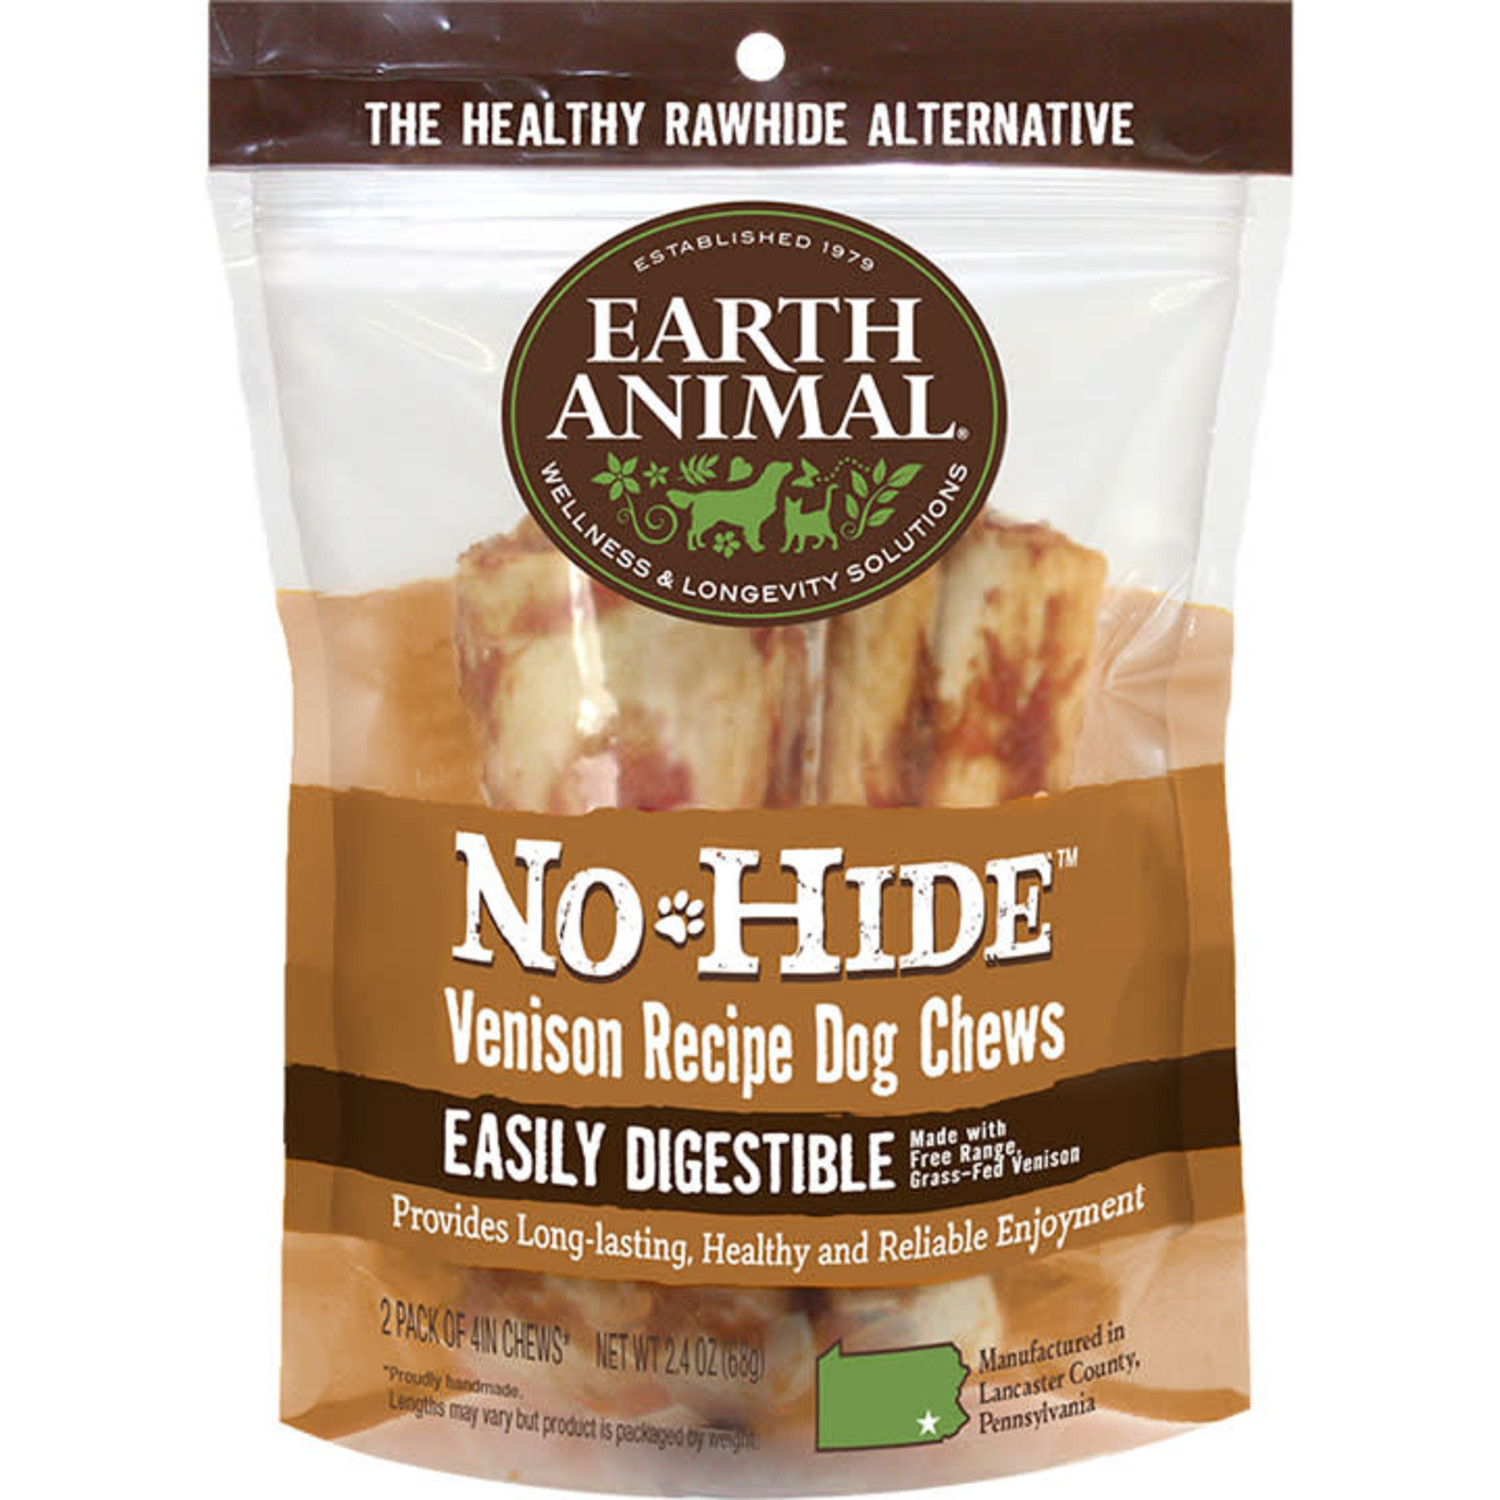 Earth Animal No-Hide All Natural Chews Venison Recipe Dog Chews 2 Pack